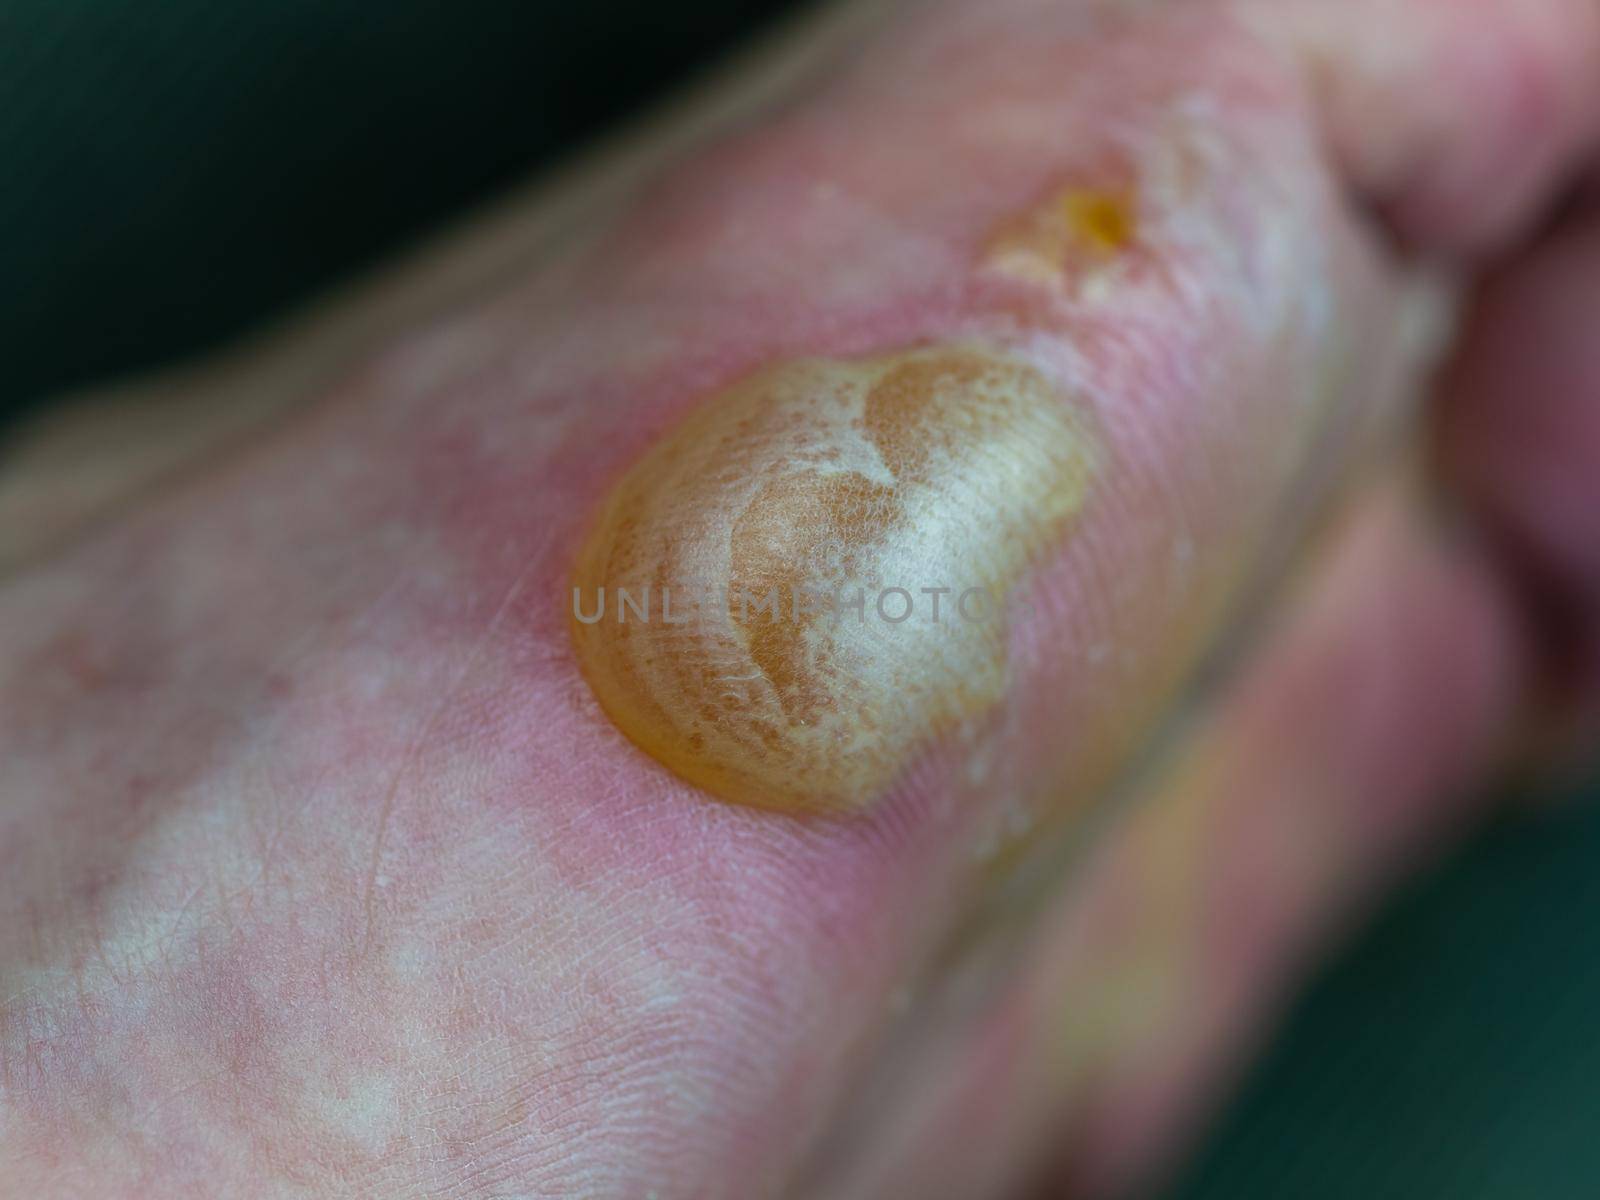 Big blister on foot from Pompholyx eczema by imagesbykenny